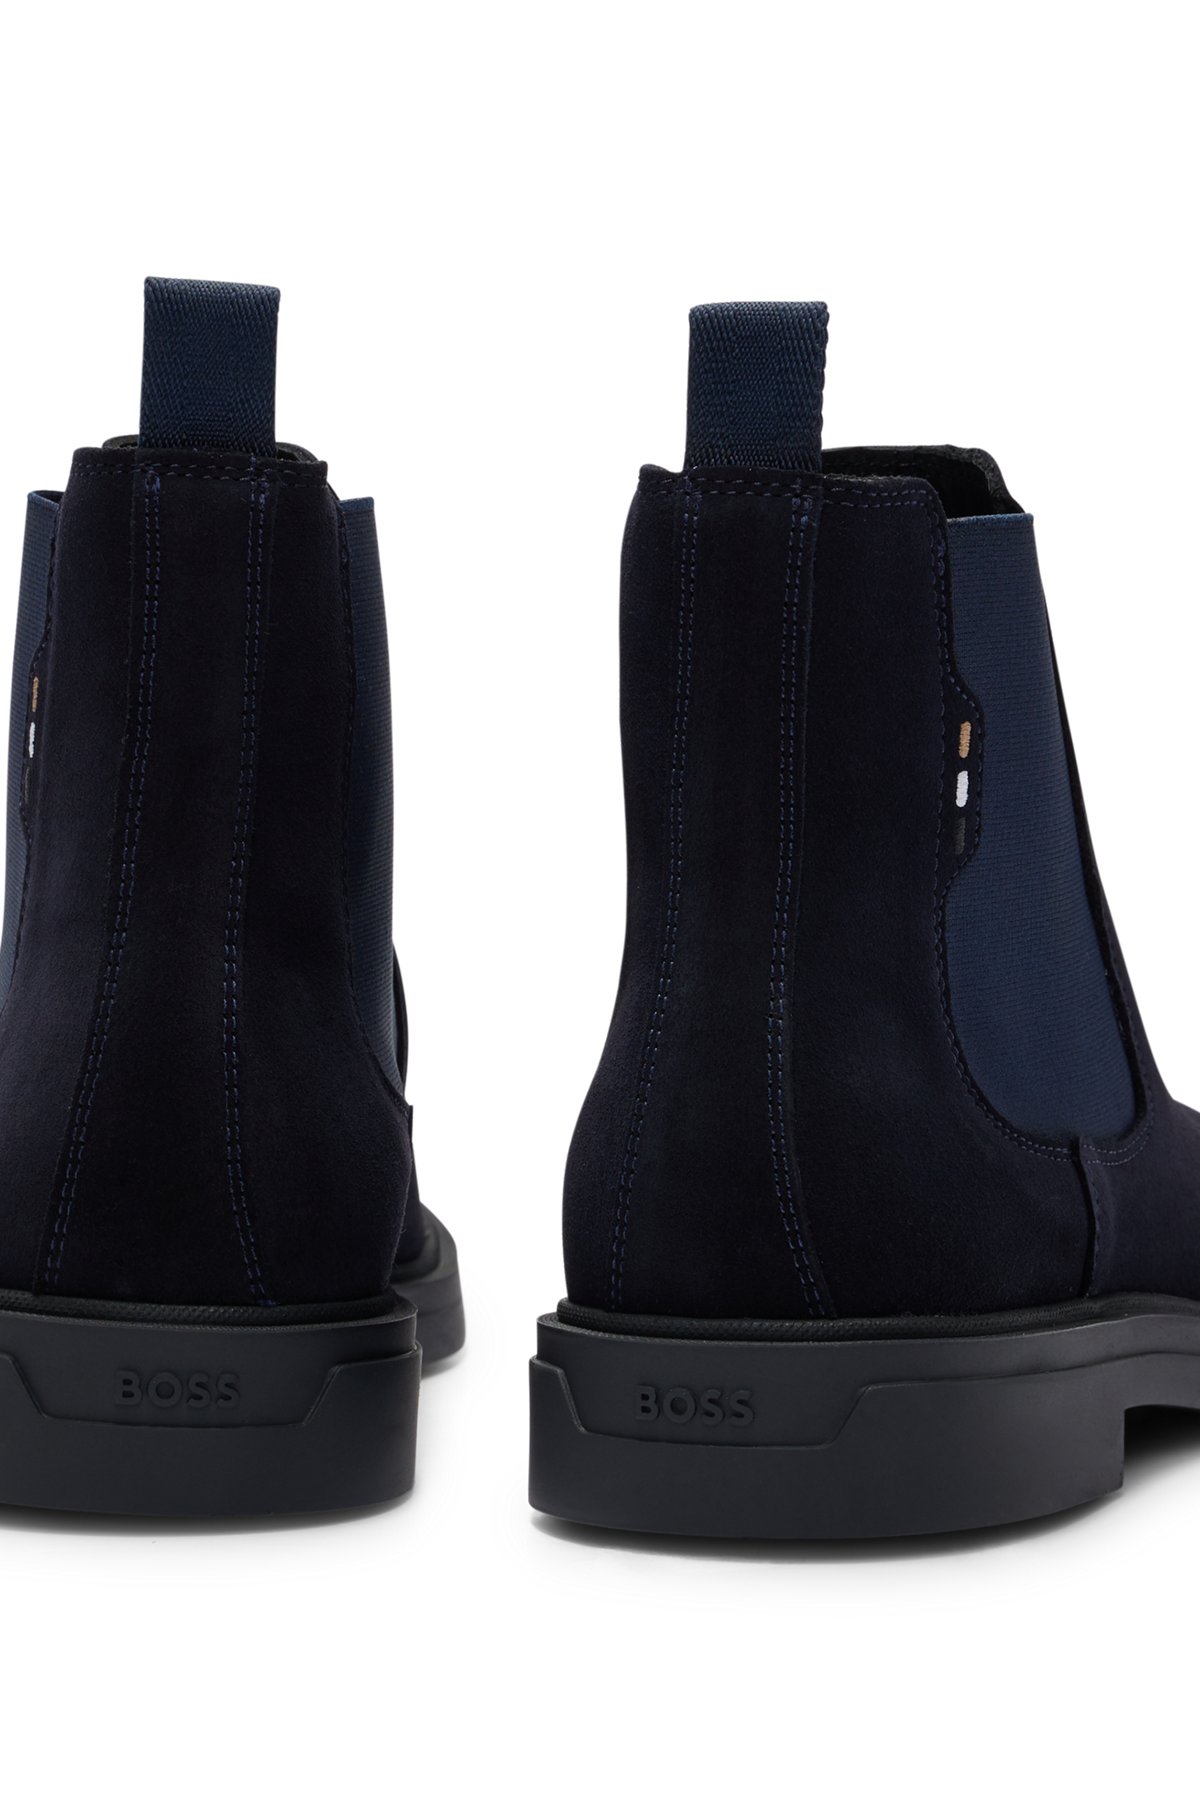 Suede Chelsea boots with signature-stripe detail, Dark Blue